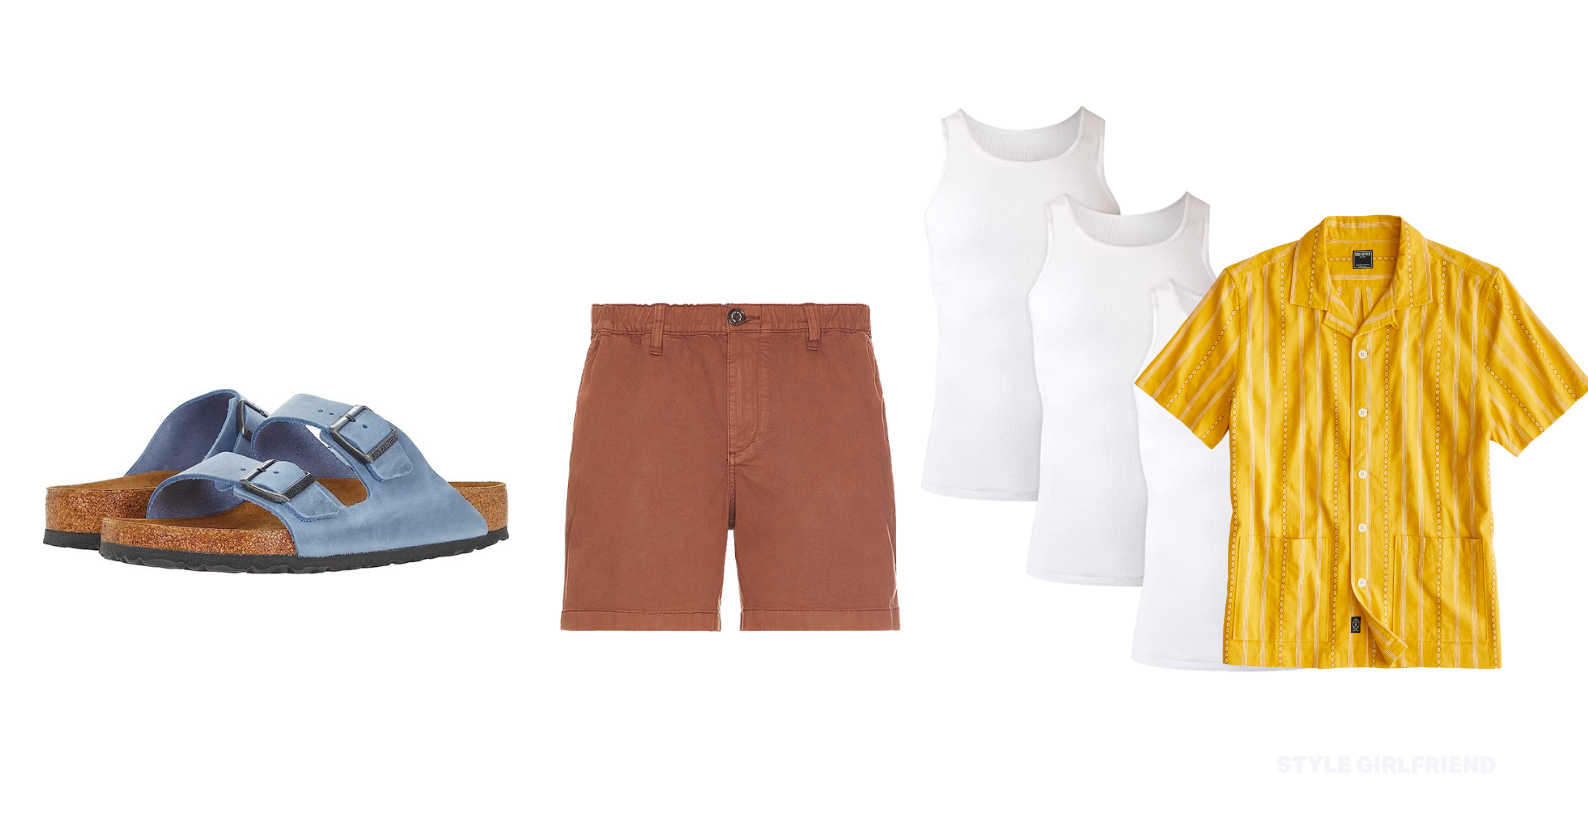 light blue and yellow outfit for men, blueberry milk trend